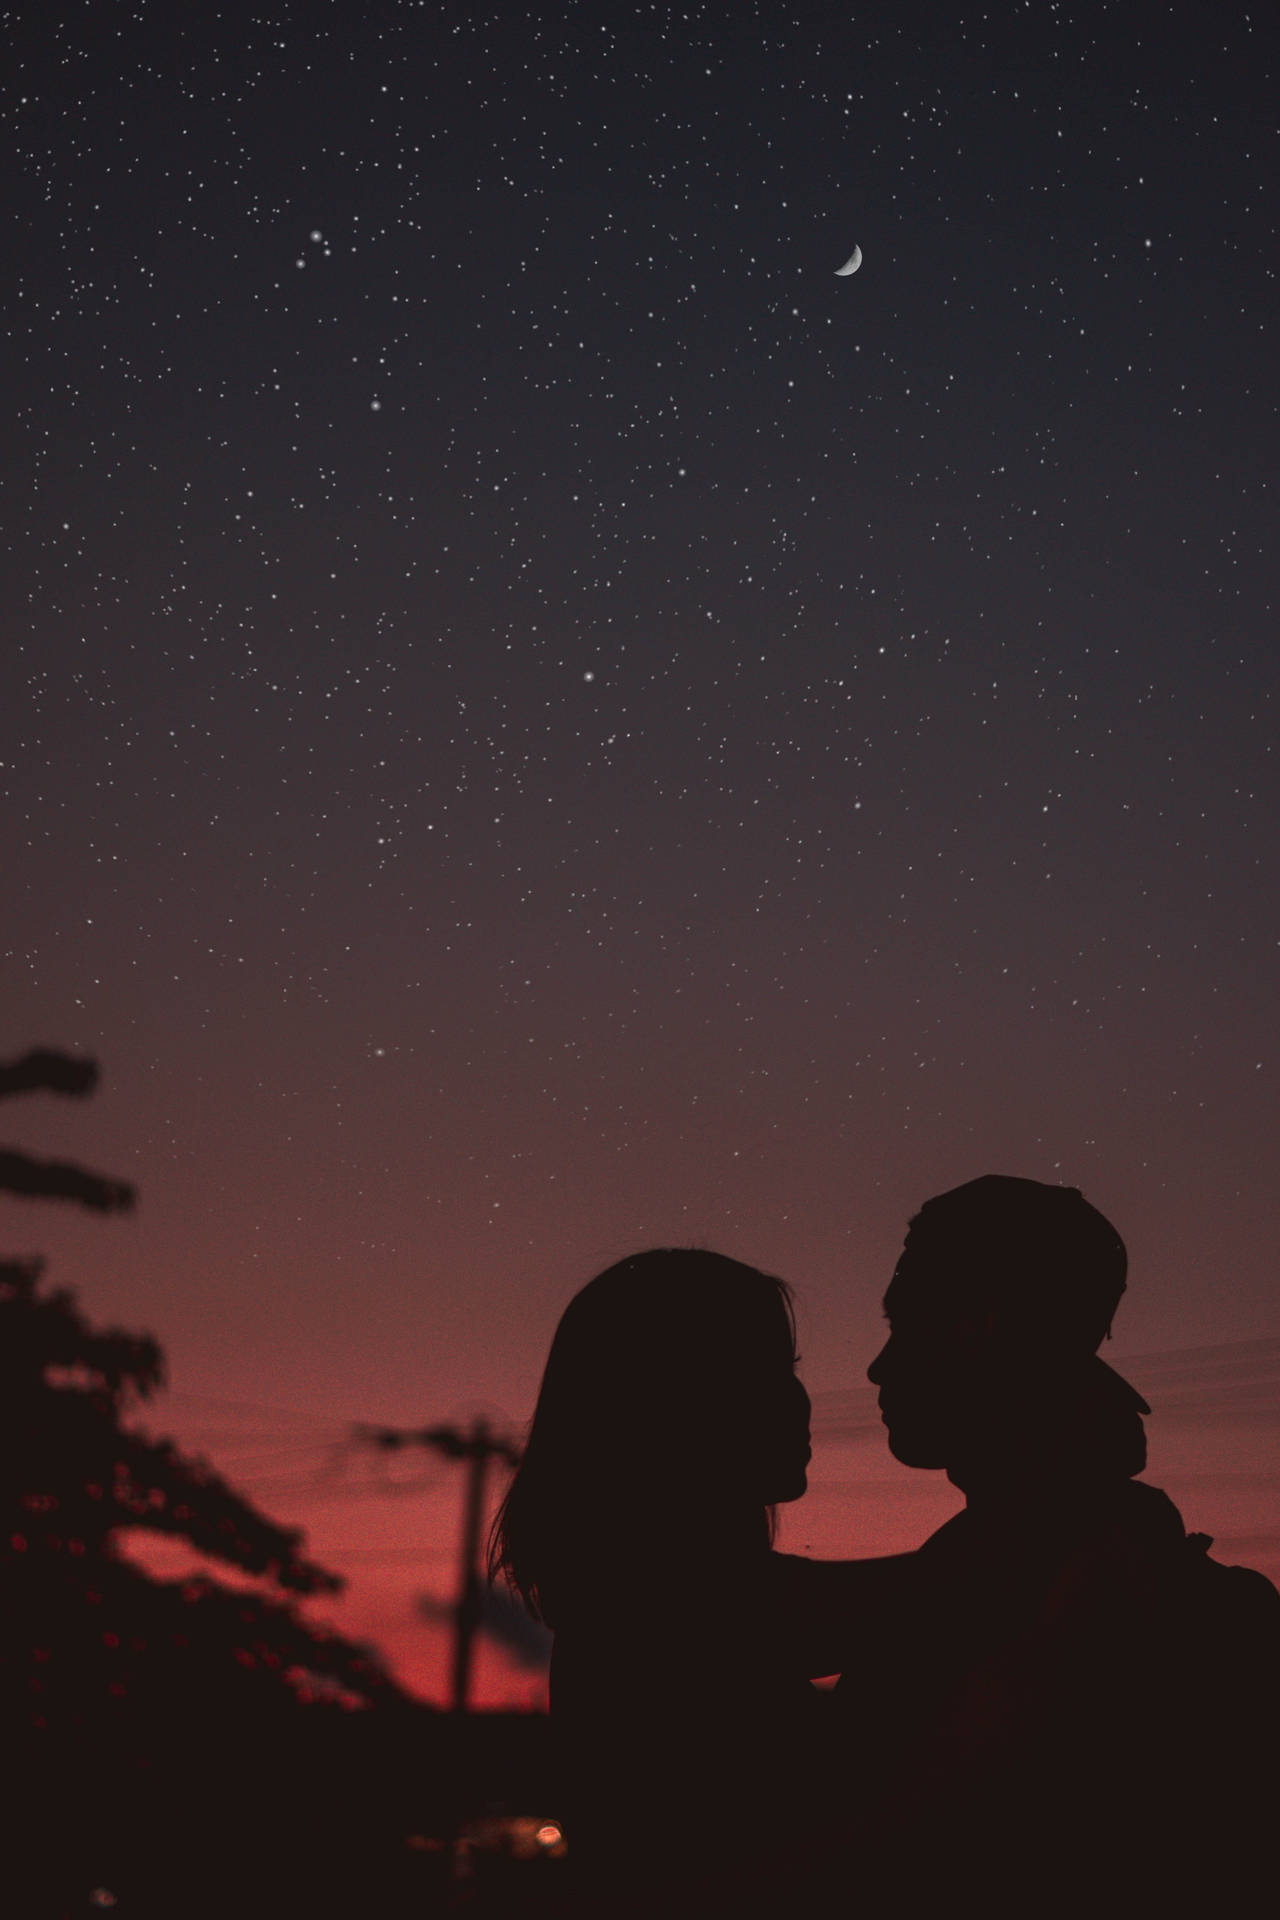 Couple Silhouette With Starry Night Background